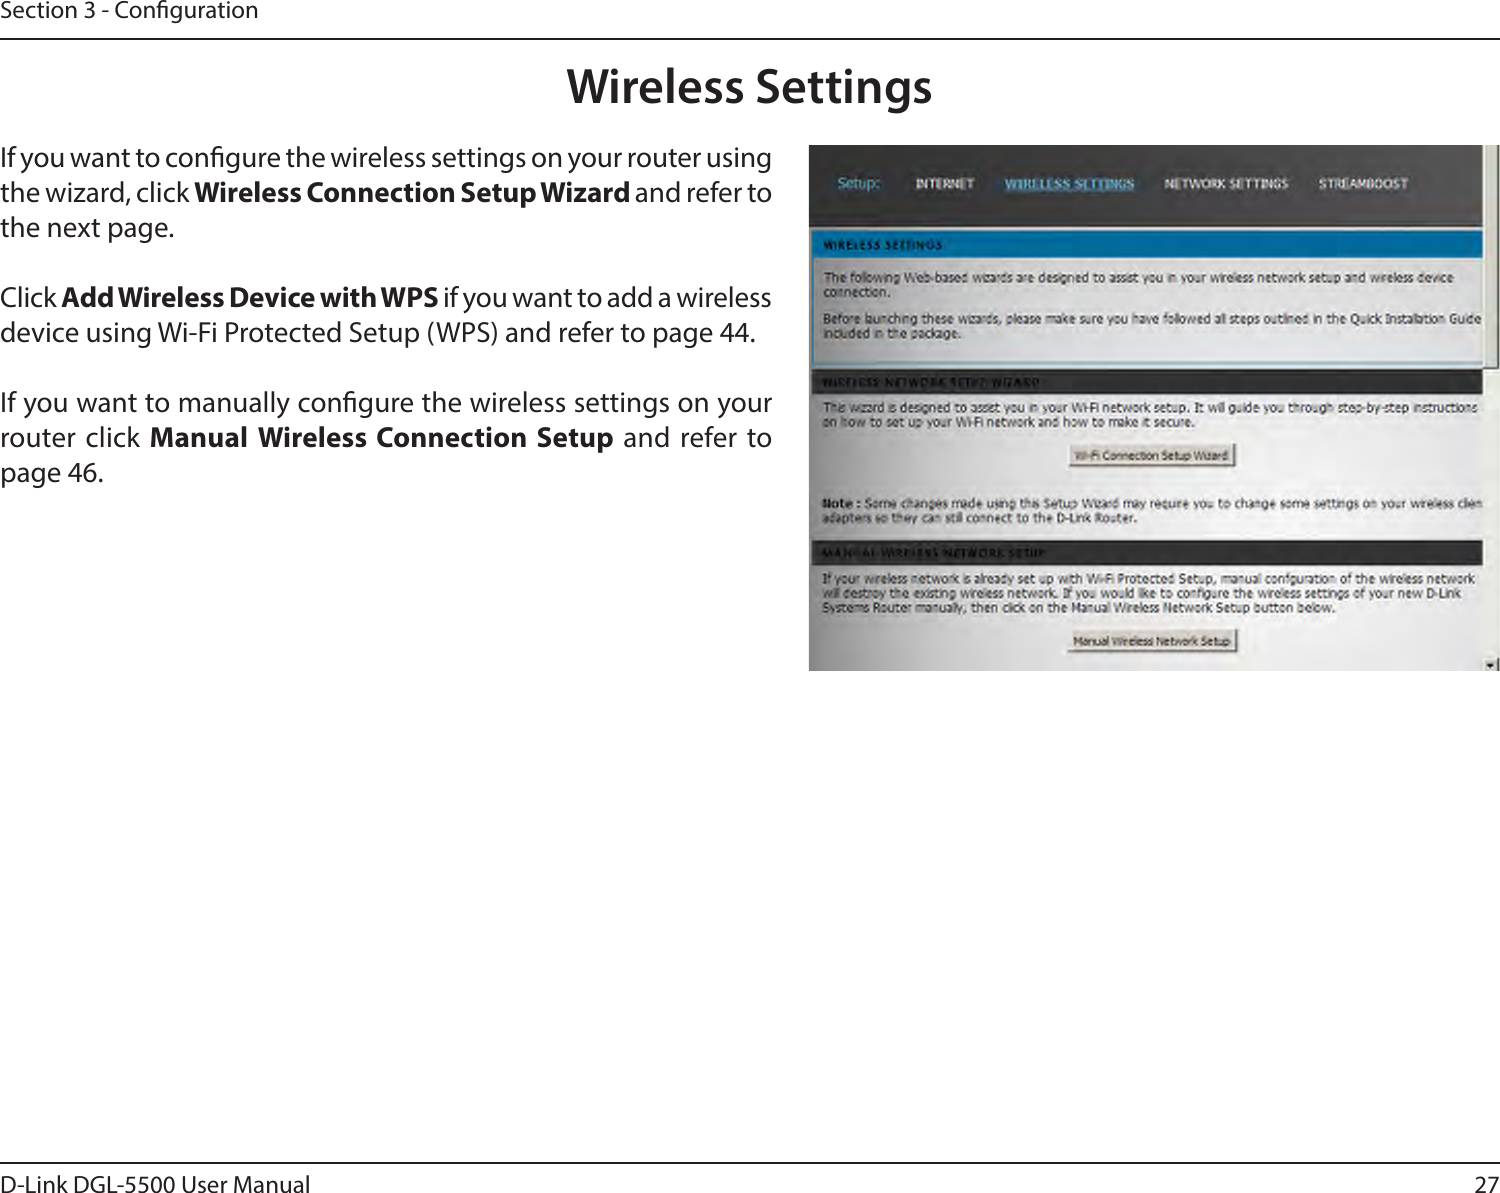 27D-Link DGL-5500 User ManualSection 3 - CongurationWireless SettingsIf you want to congure the wireless settings on your router using the wizard, click Wireless Connection Setup Wizard and refer to the next page.Click Add Wireless Device with WPS if you want to add a wireless device using Wi-Fi Protected Setup (WPS) and refer to page 44.If you want to manually congure the wireless settings on your router click Manual Wireless Connection Setup and refer to page 46.